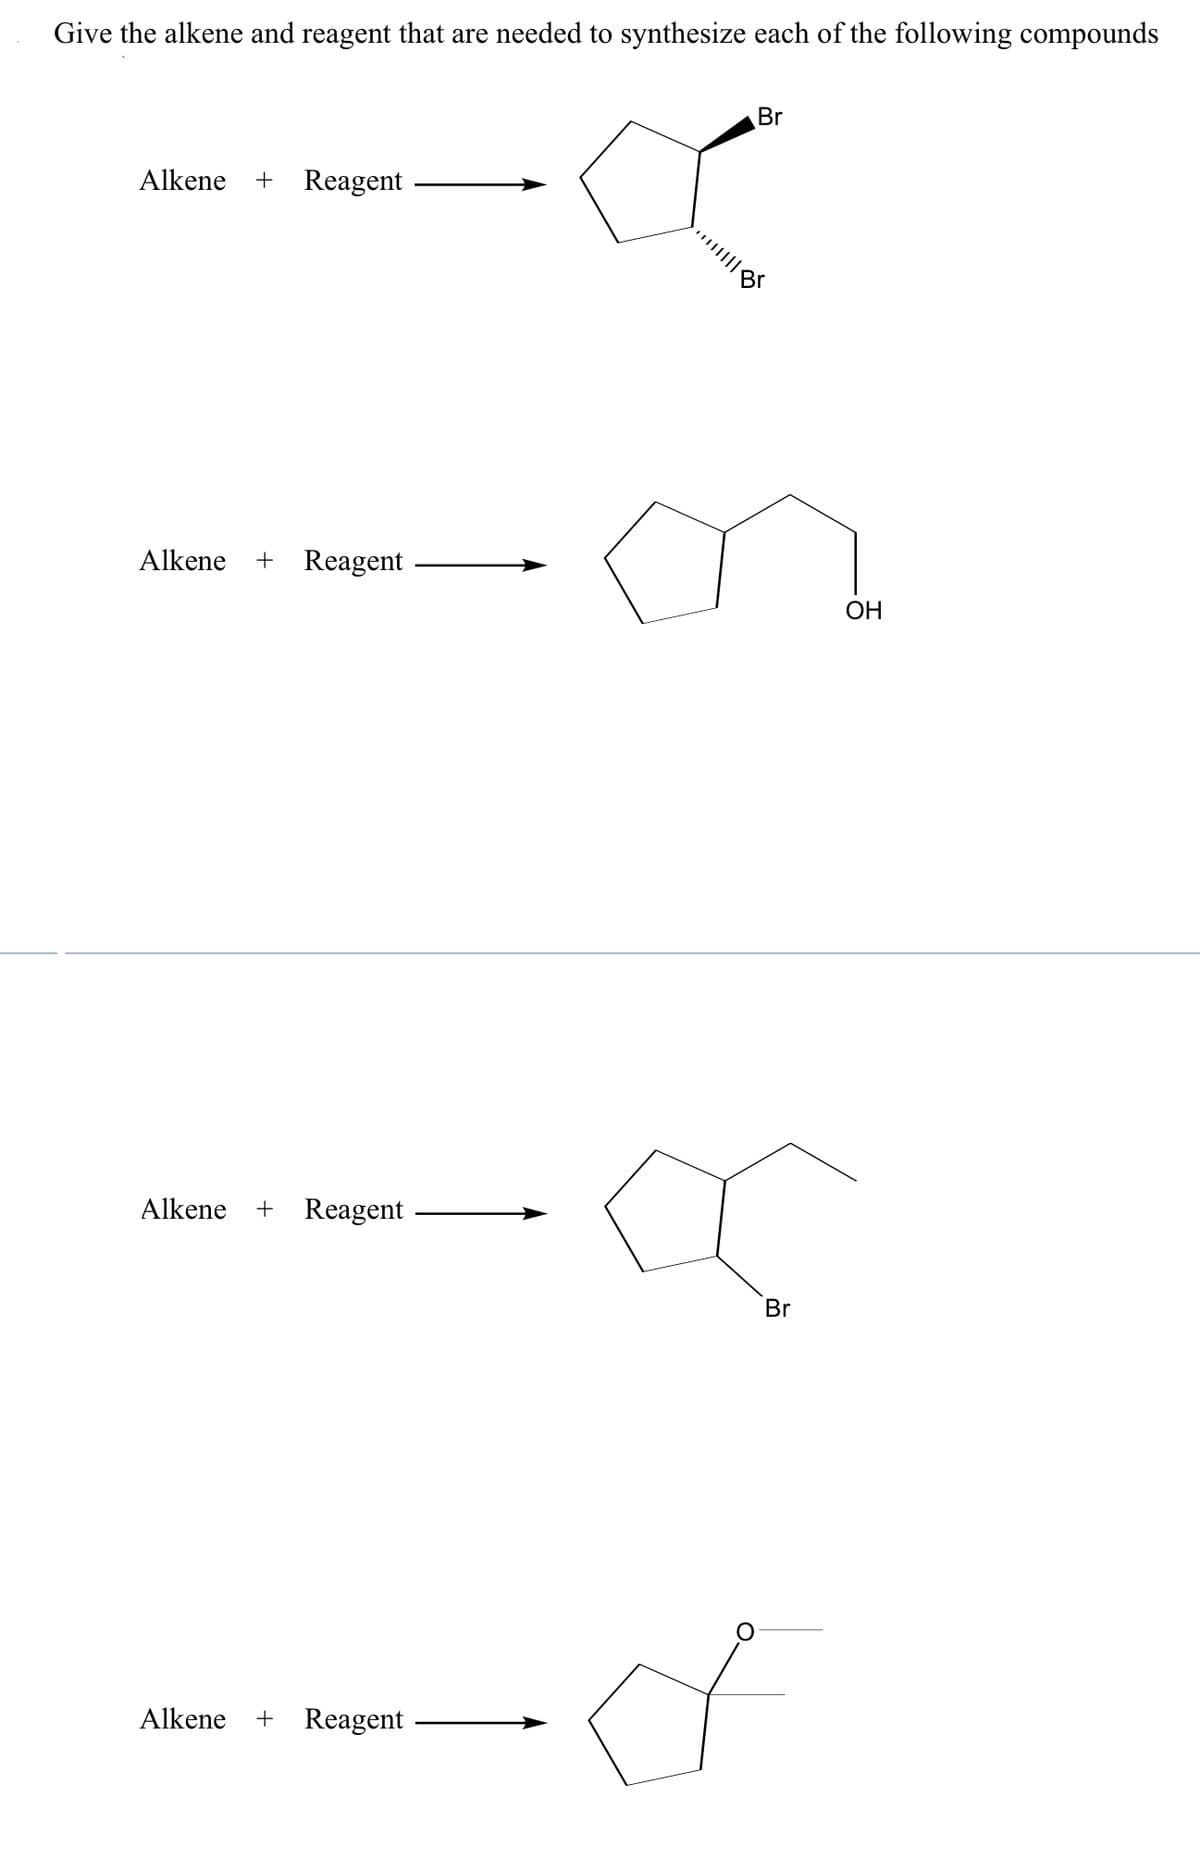 Give the alkene and reagent that are needed to synthesize each of the following compounds
Br
Alkene + Reagent
Alkene + Reagent
ОН
Alkene
+ Reagent
Br
Alkene + Reagent
